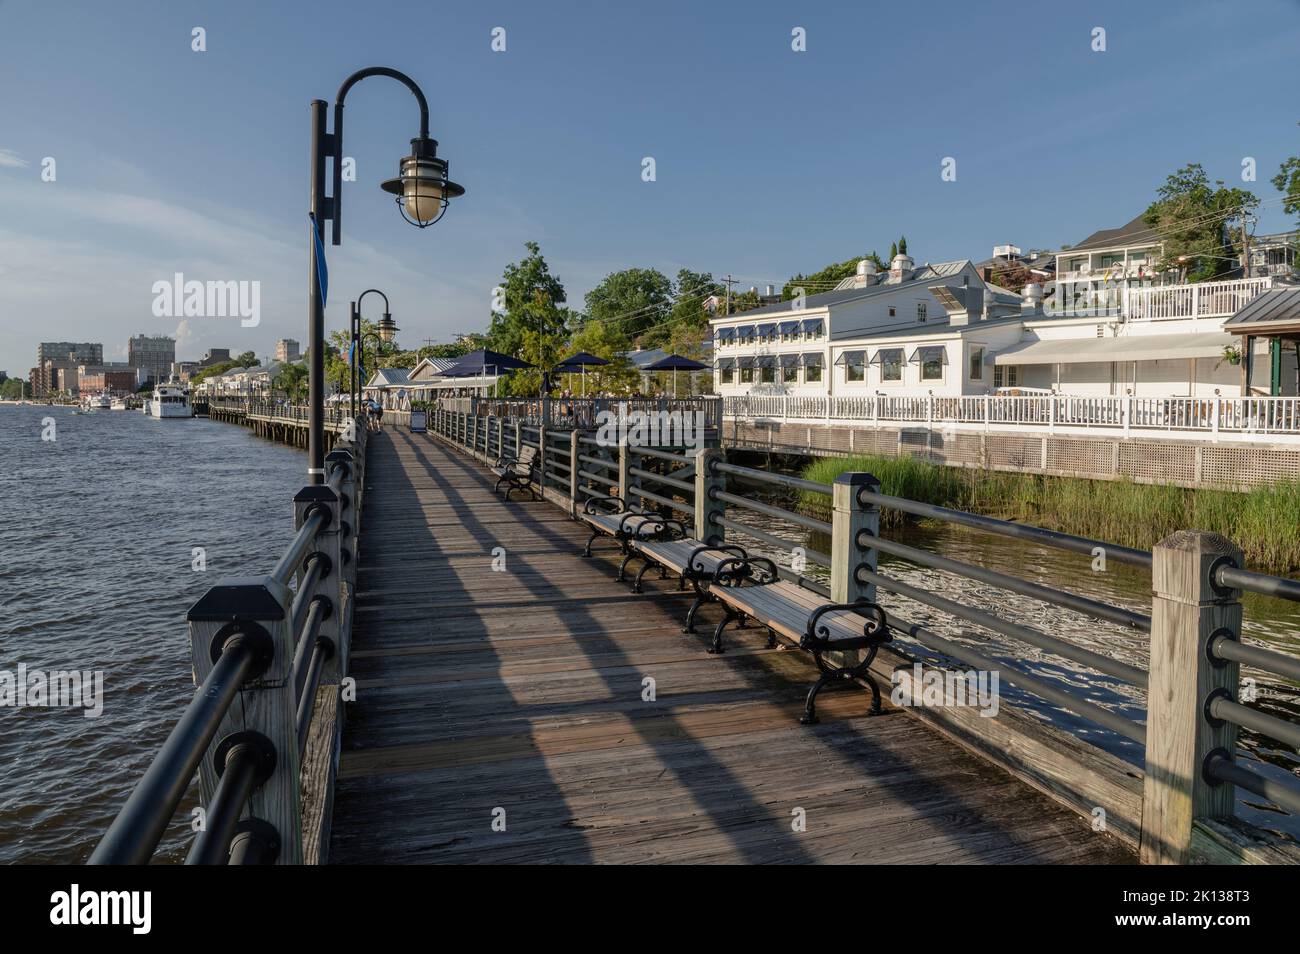 Sunset on the Riverwalk along the Cape Fear River, Wilmington, North Carolina, United States of America, North America Stock Photo